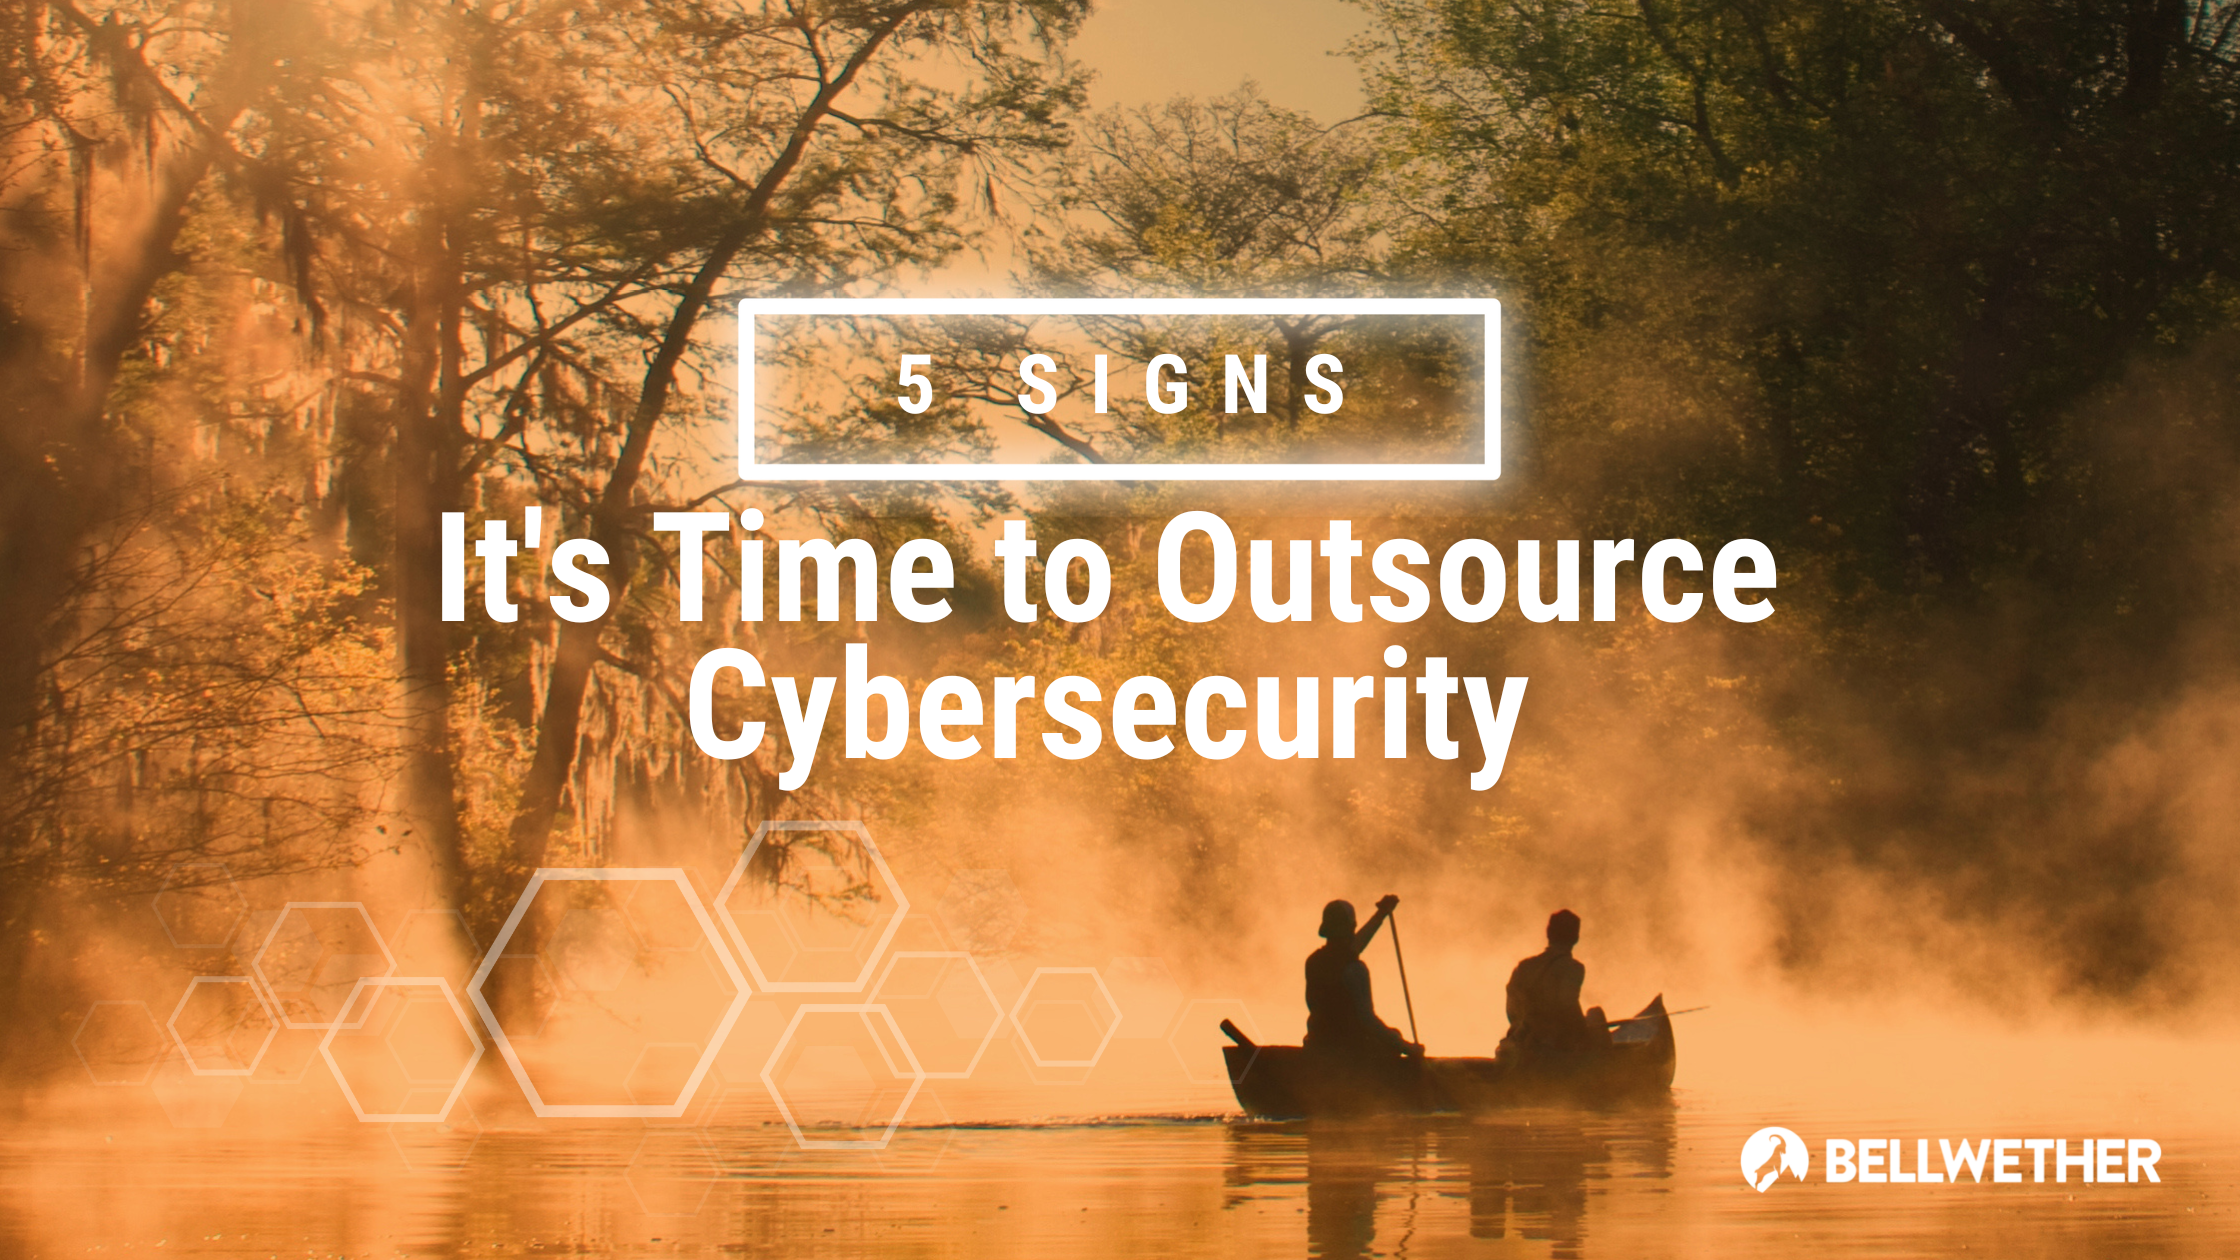 5 signs it's time to outsource cybersecurity